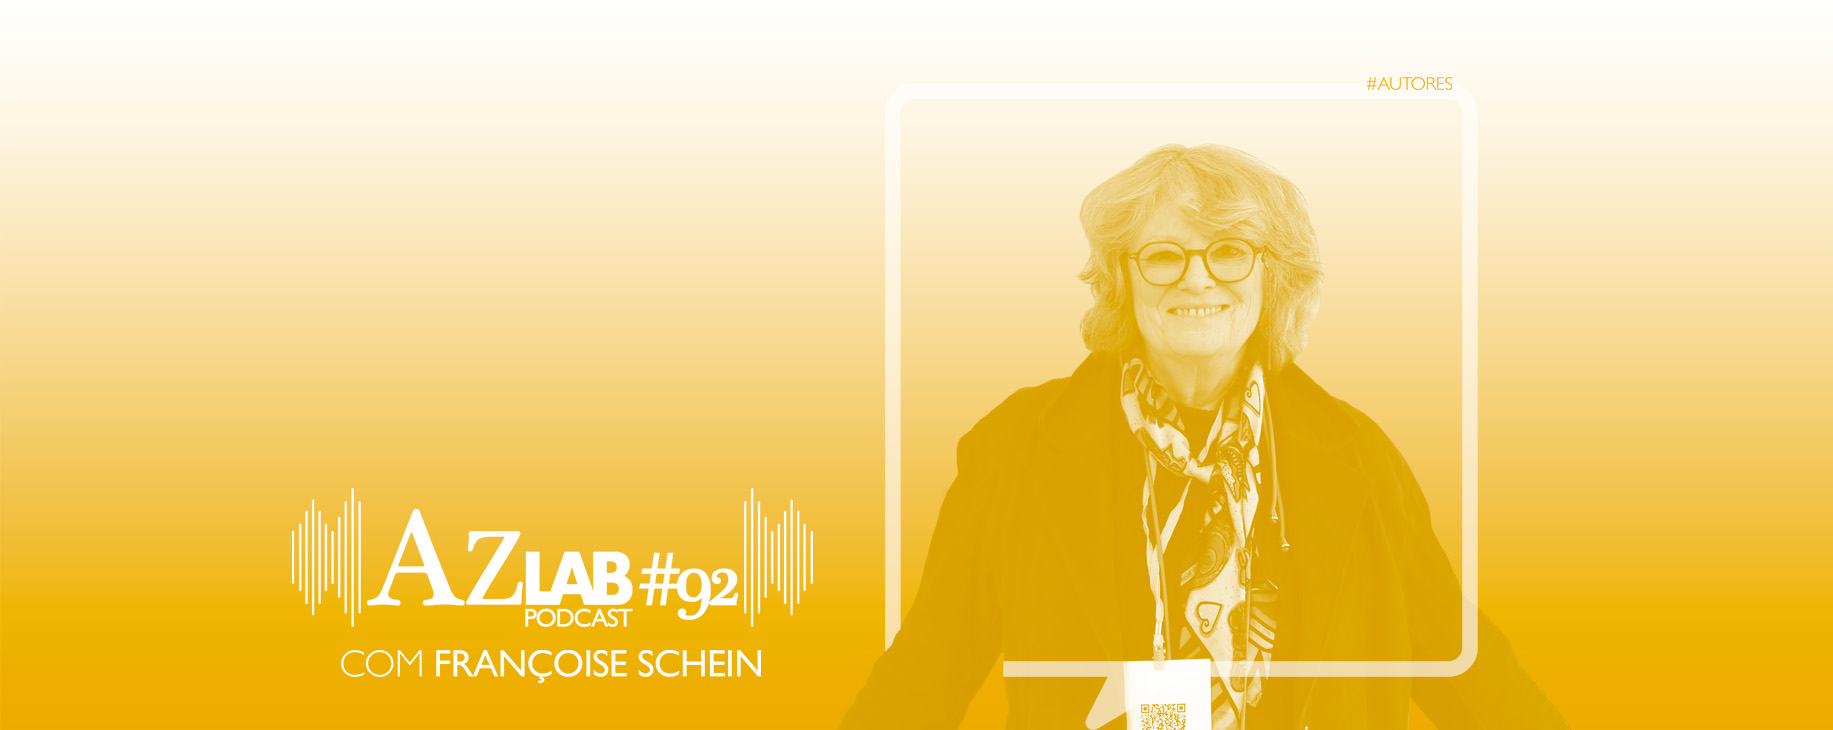 AZLAB#92 [PODCAST] | WITH FRANOISE SCHEIN